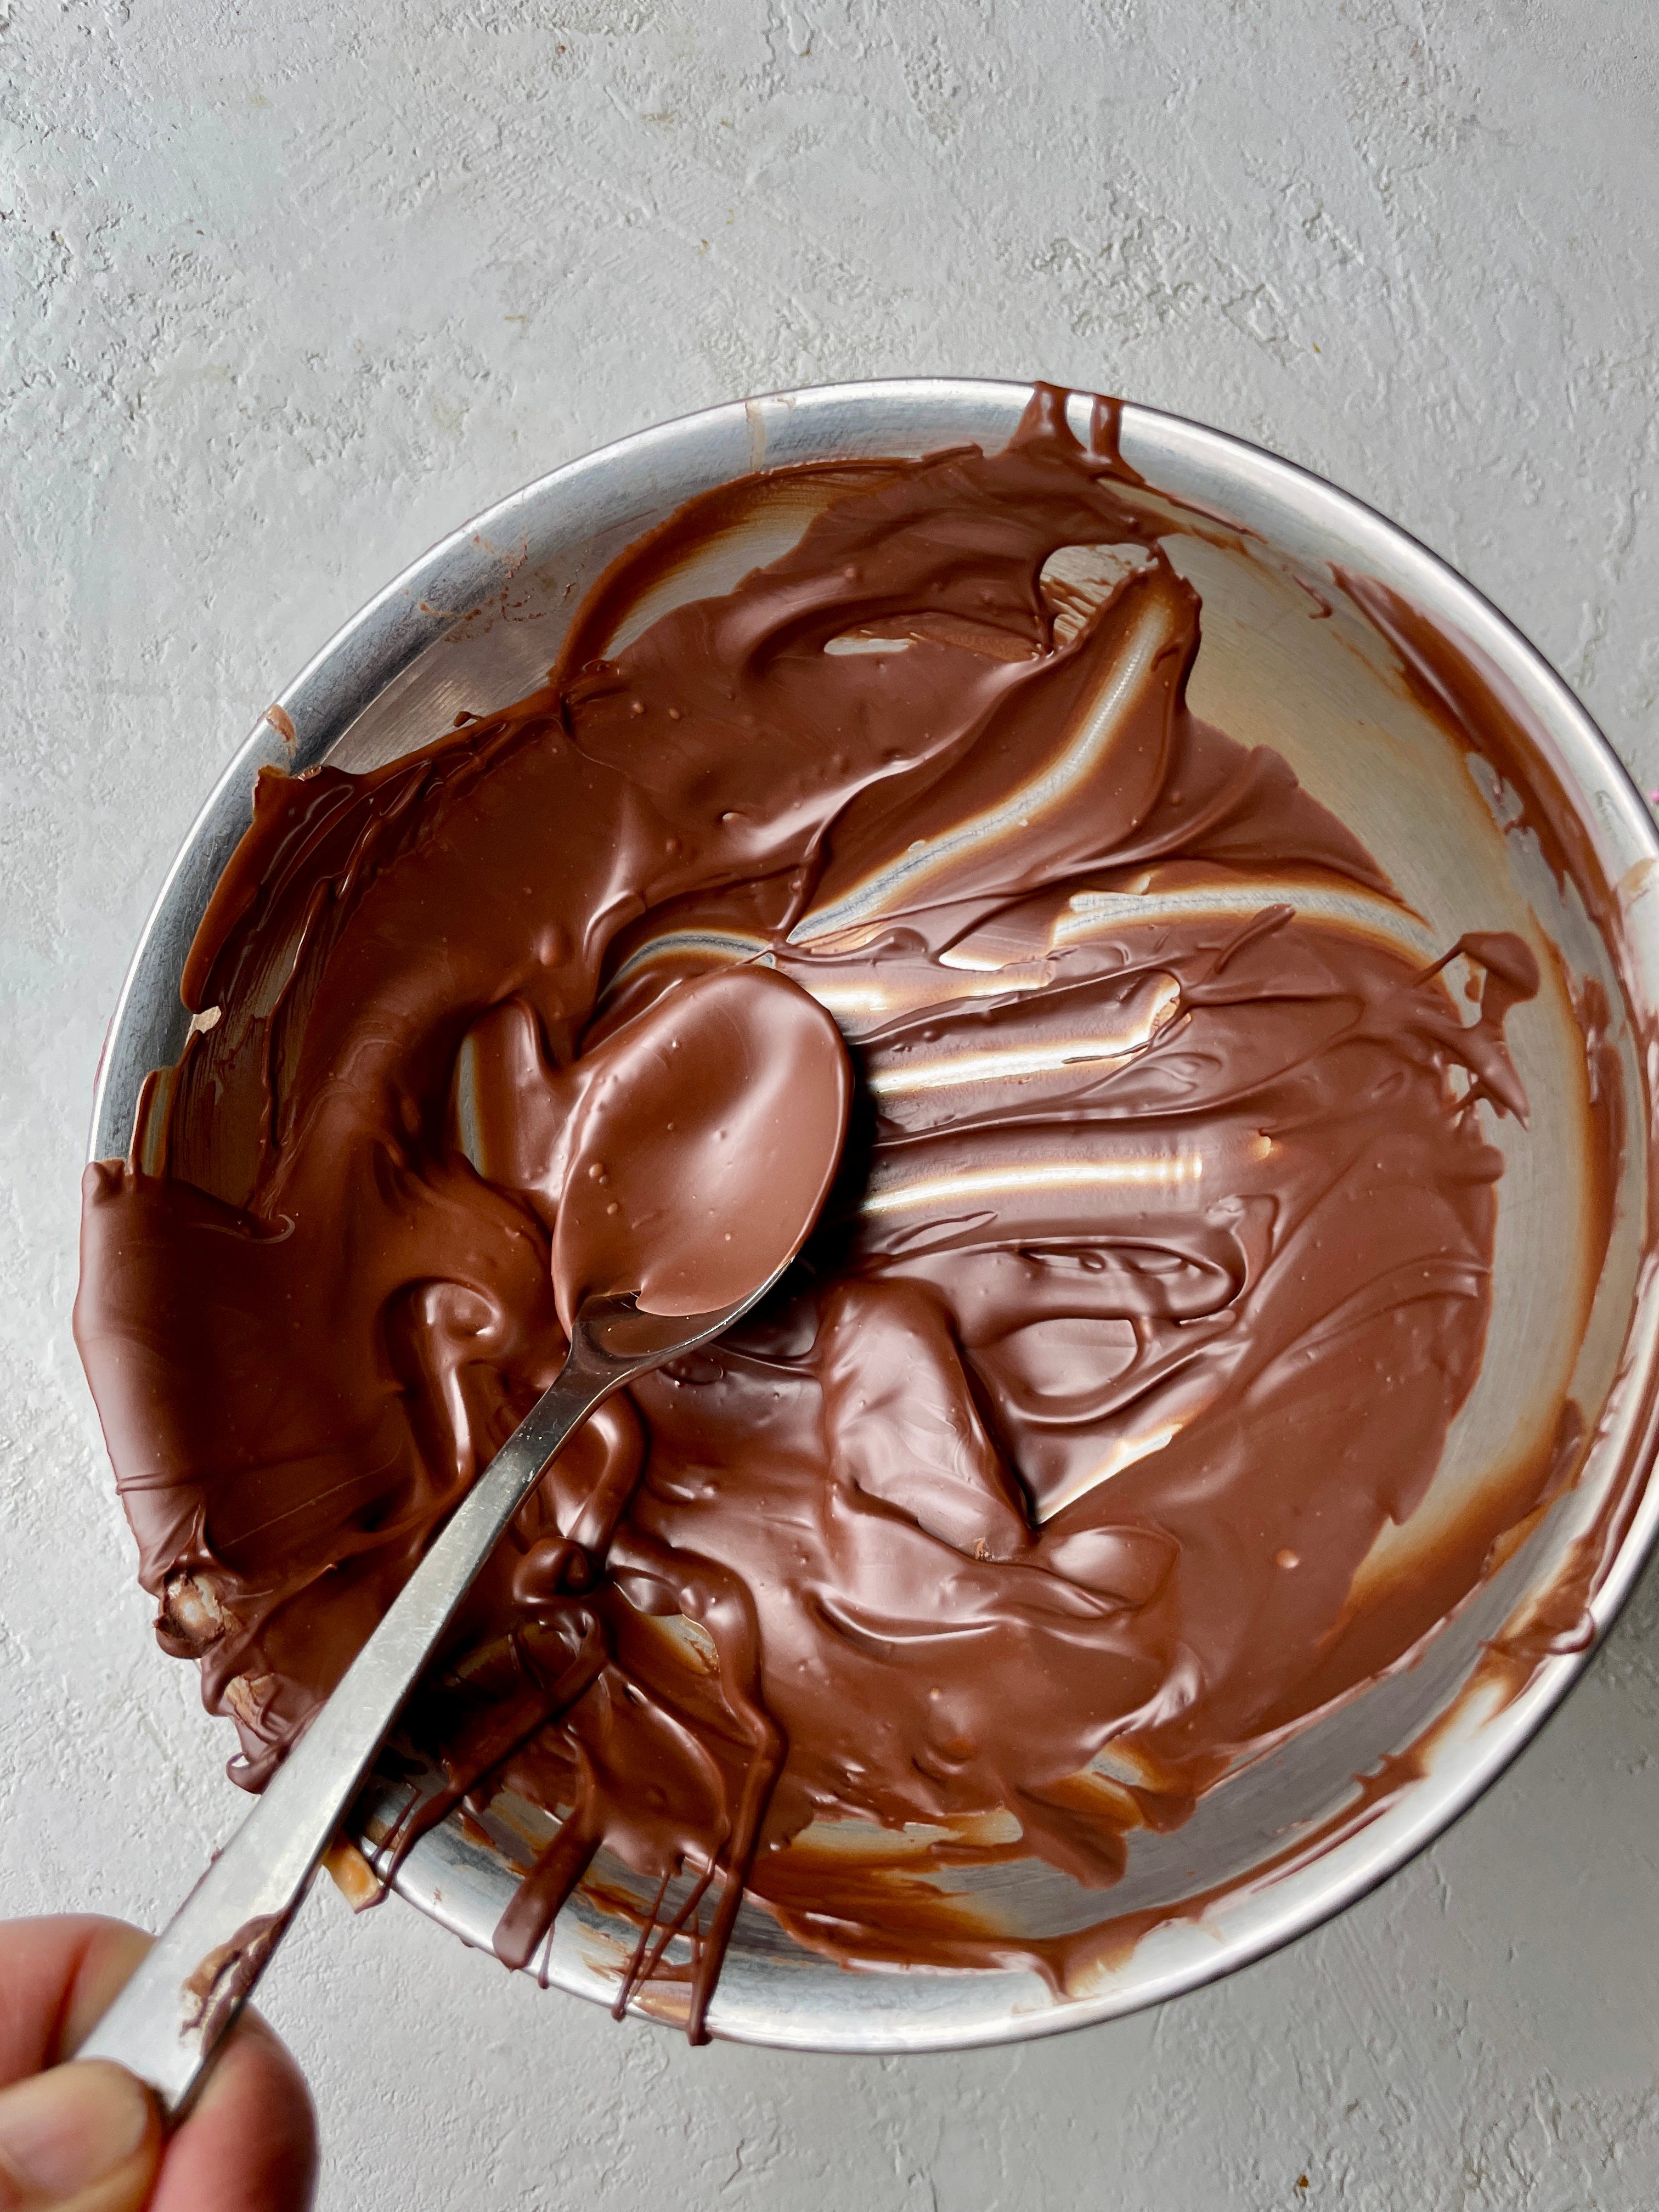 How to Temper Chocolate Using the Microwave